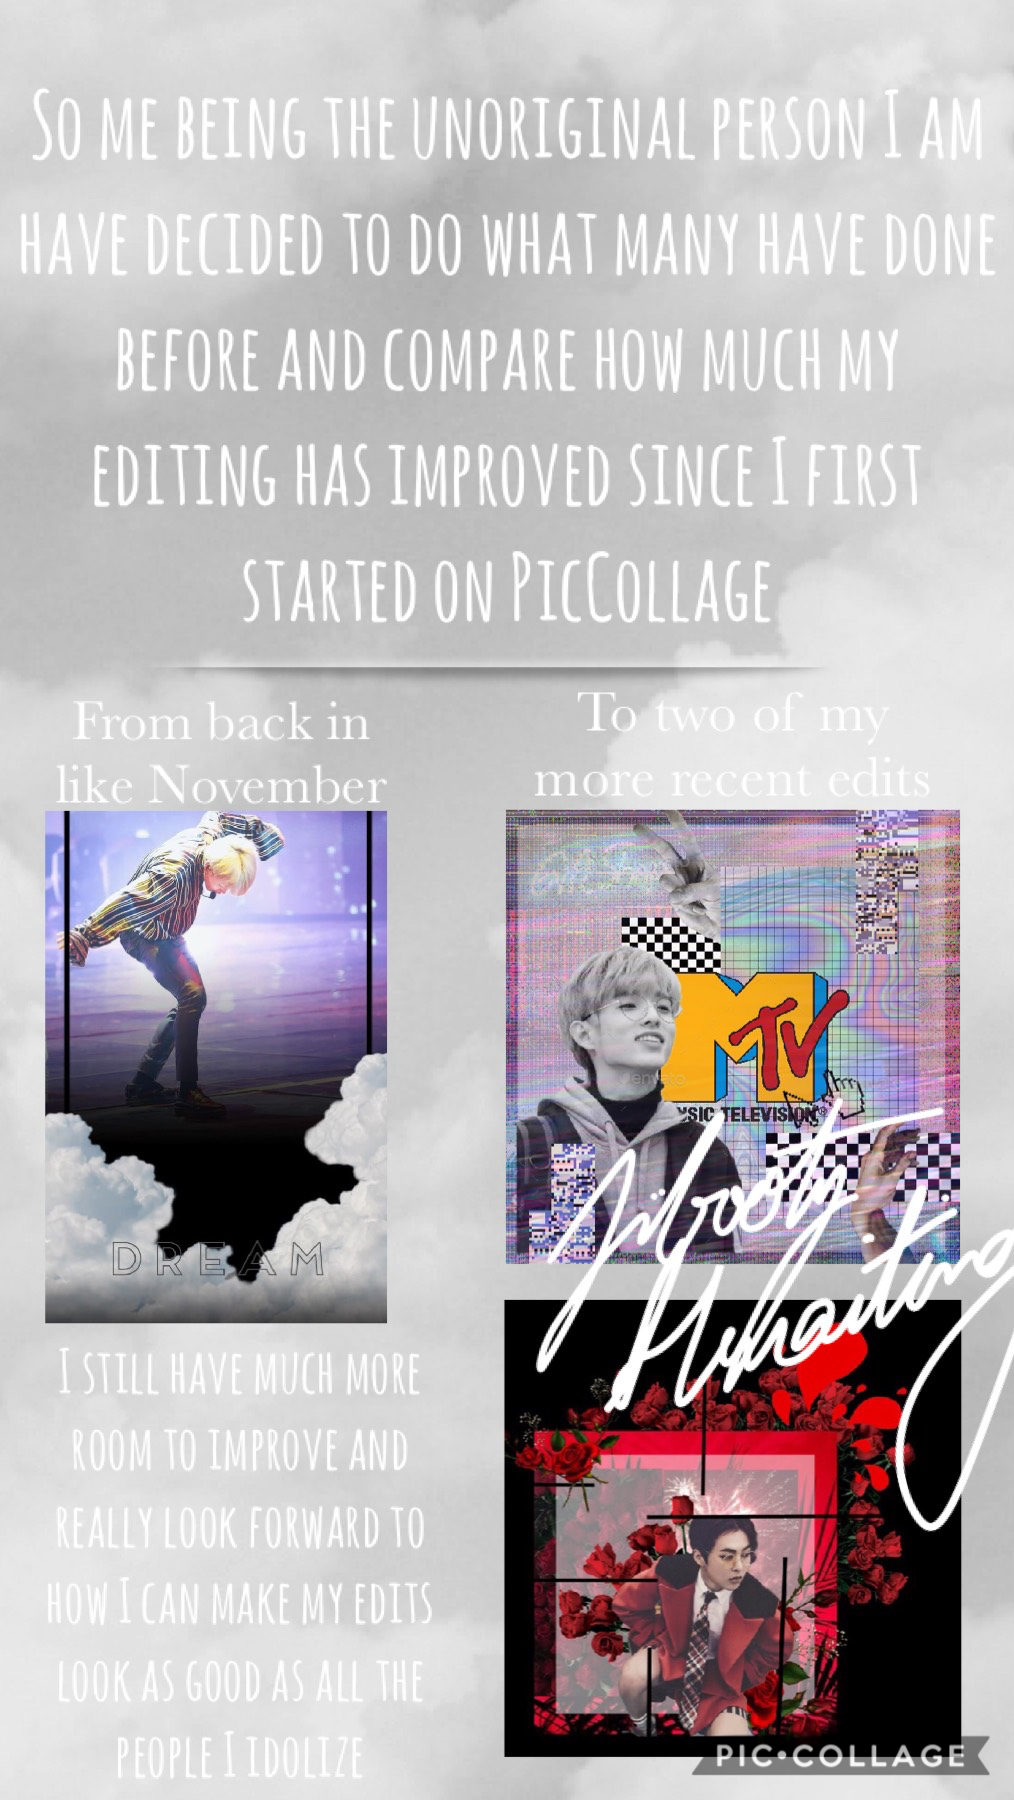 I think I may try using other apps like picsart and such to help enhance my edits but from then until now I’ve pretty much been a strictly pc user and I think that’s an accomplishment seeing as what I’ve been able to create with just PicCollage 